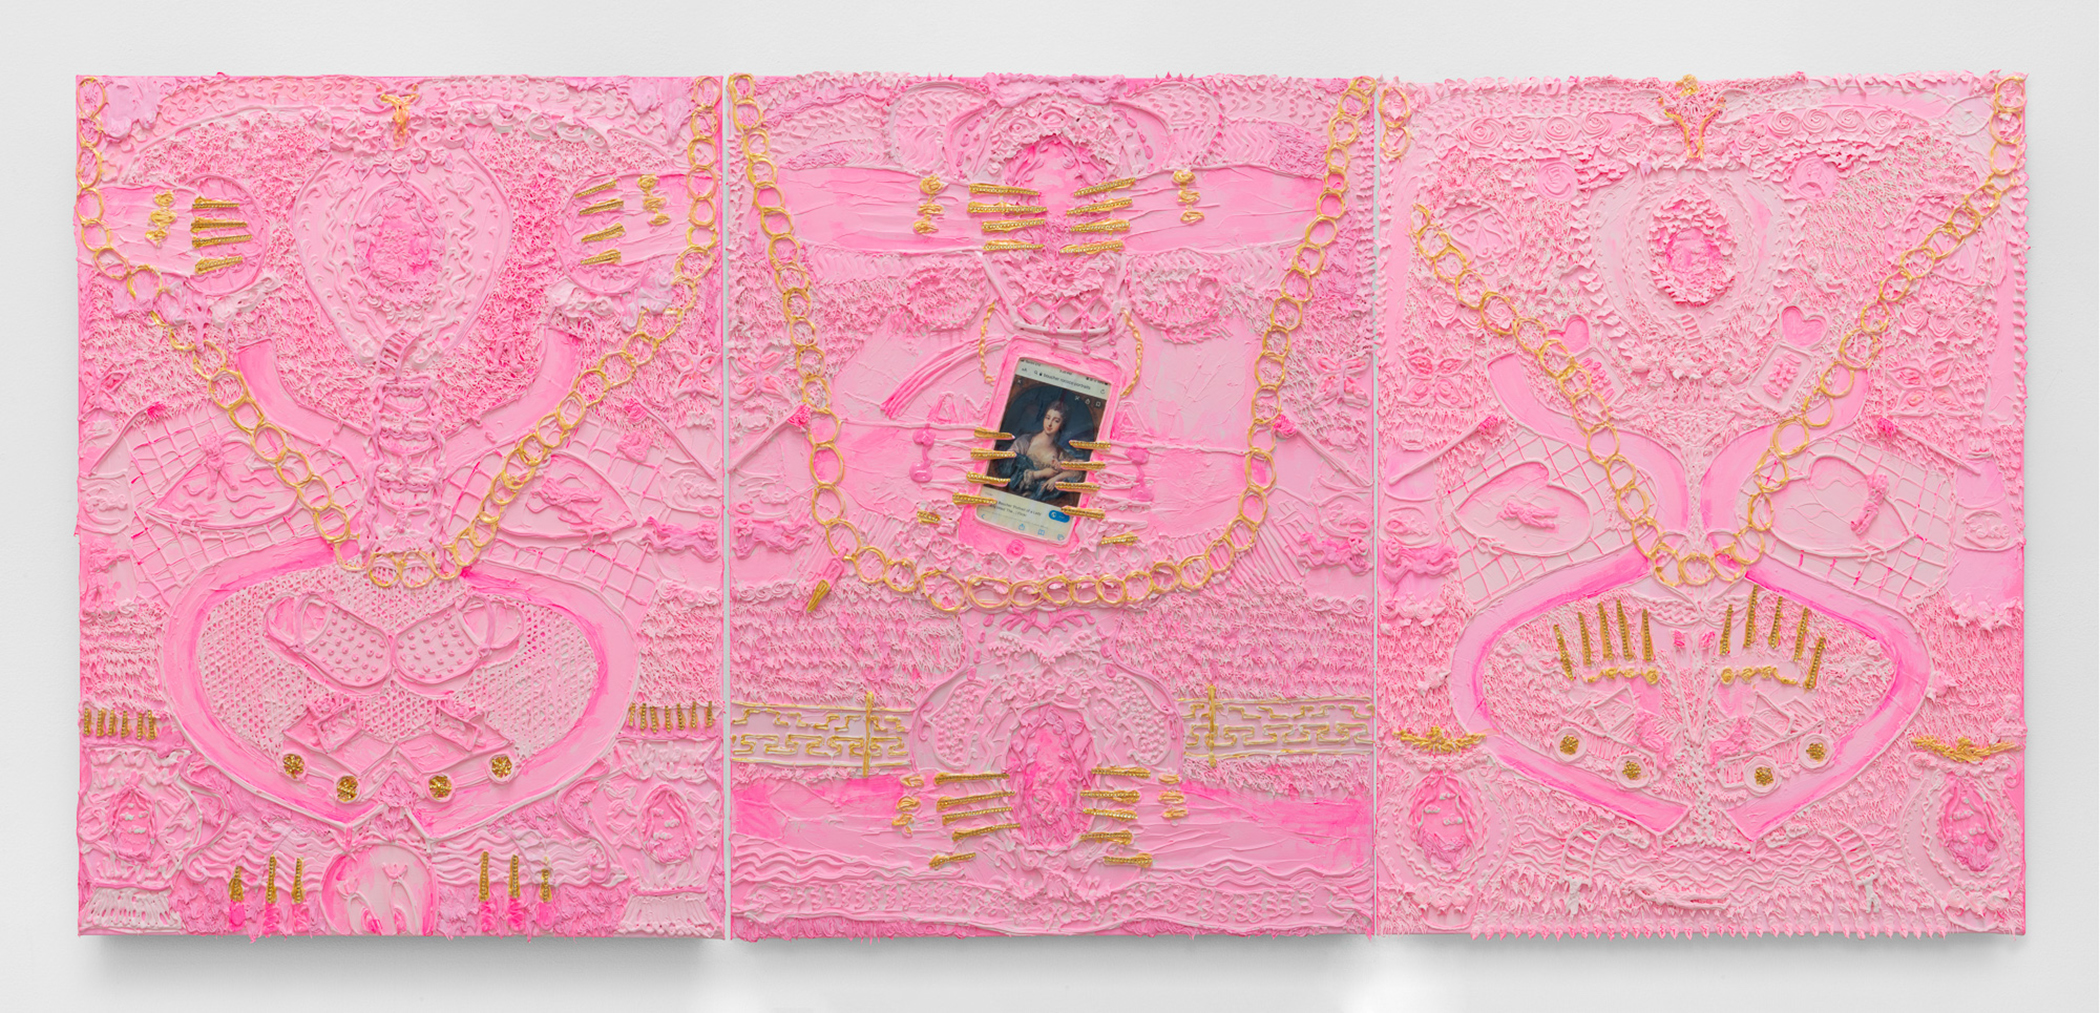 Photo of Pinknologic Anxiety (After Francois Boucher, Madame de Pompadour, c. 1755), 2020, acrylic piping and collage on canvas, 30” x 40” triptych